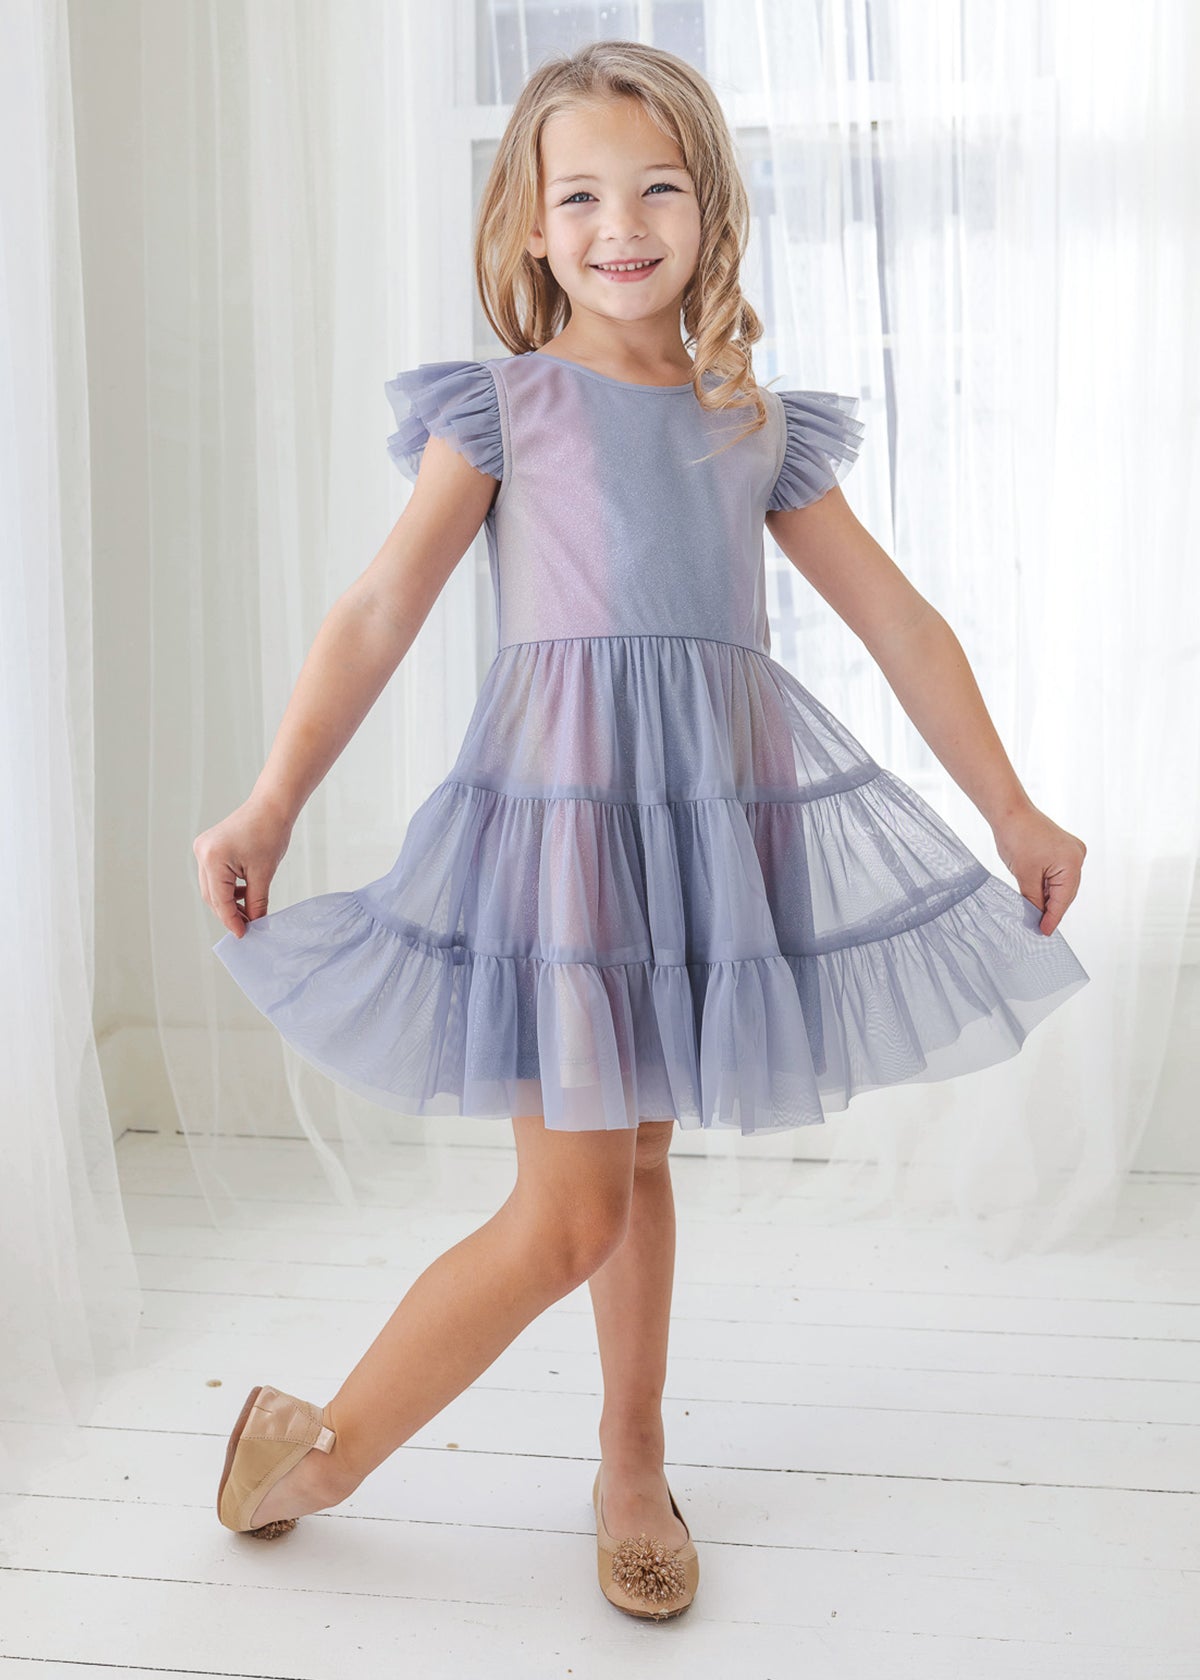 Mabel and Honey Soft Tulle and Sparkling Knit Dress